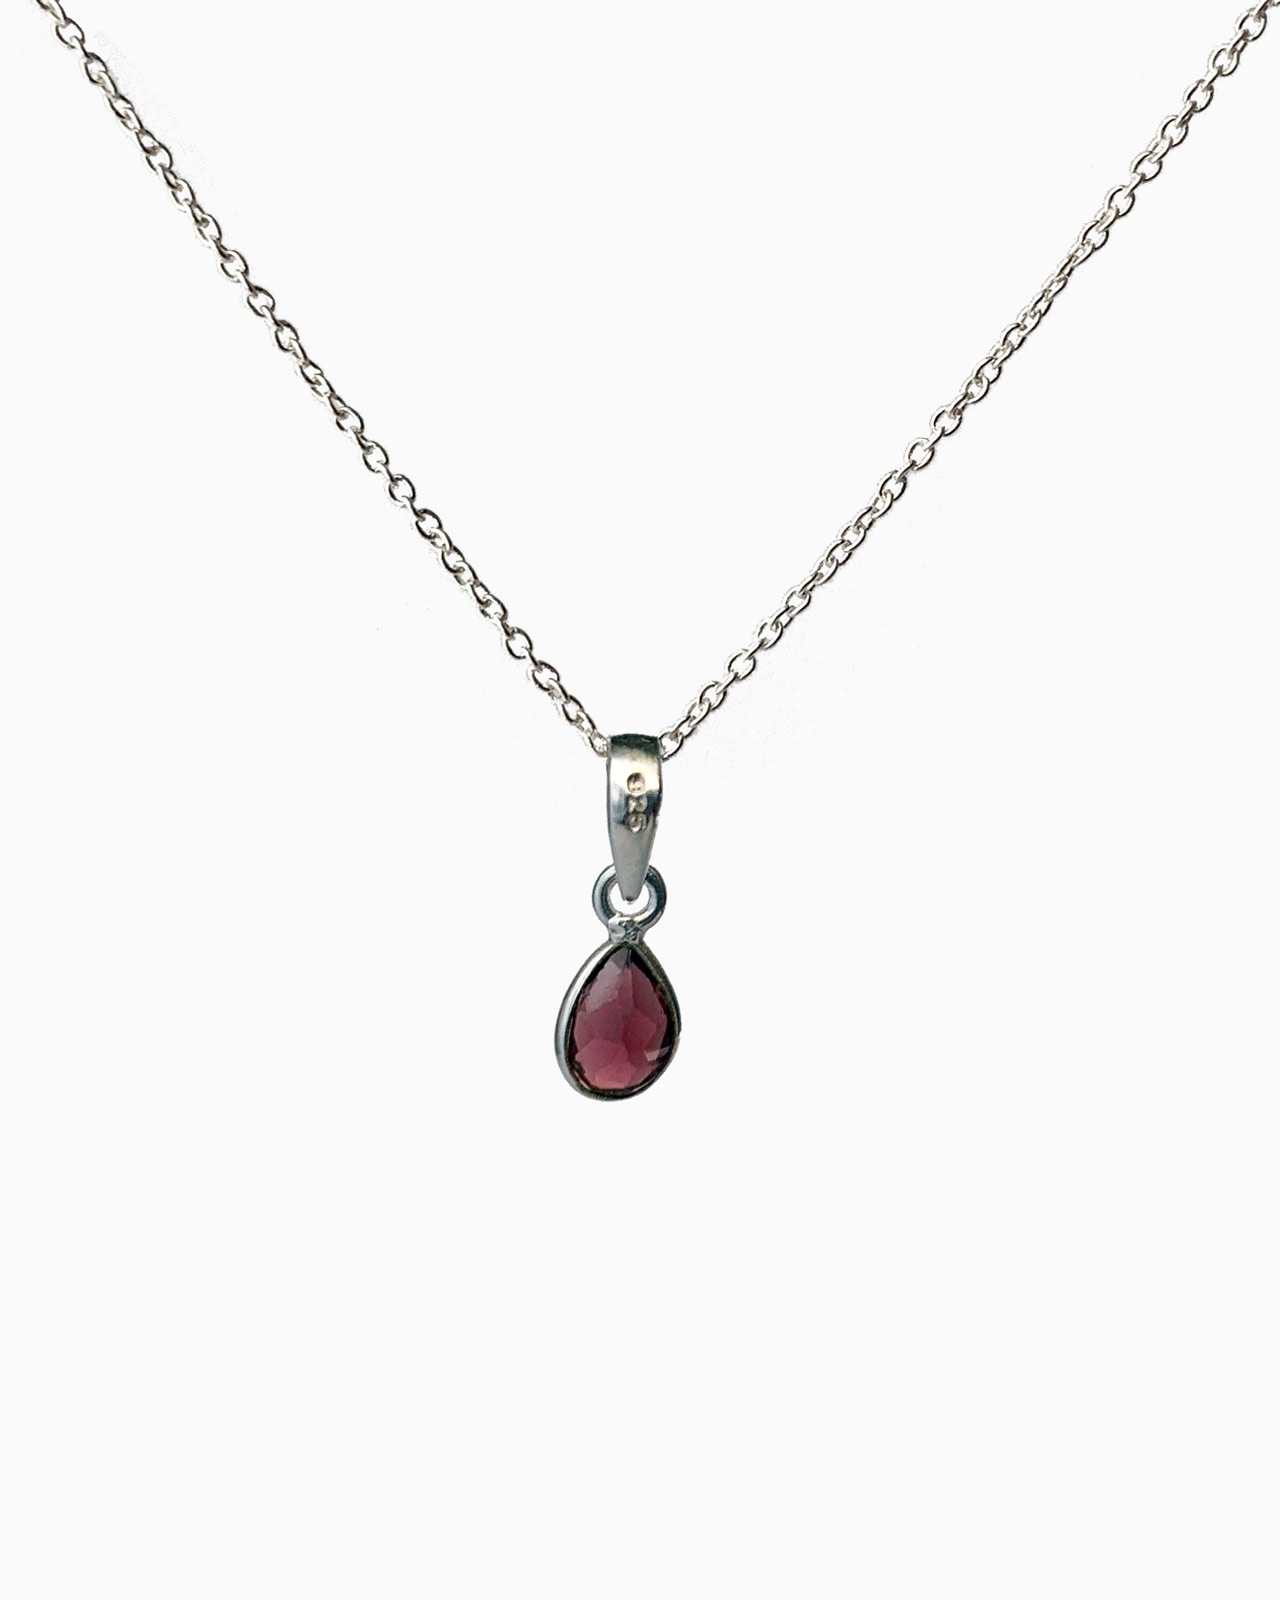 Garnet Pendant and Sterling Silver Necklace